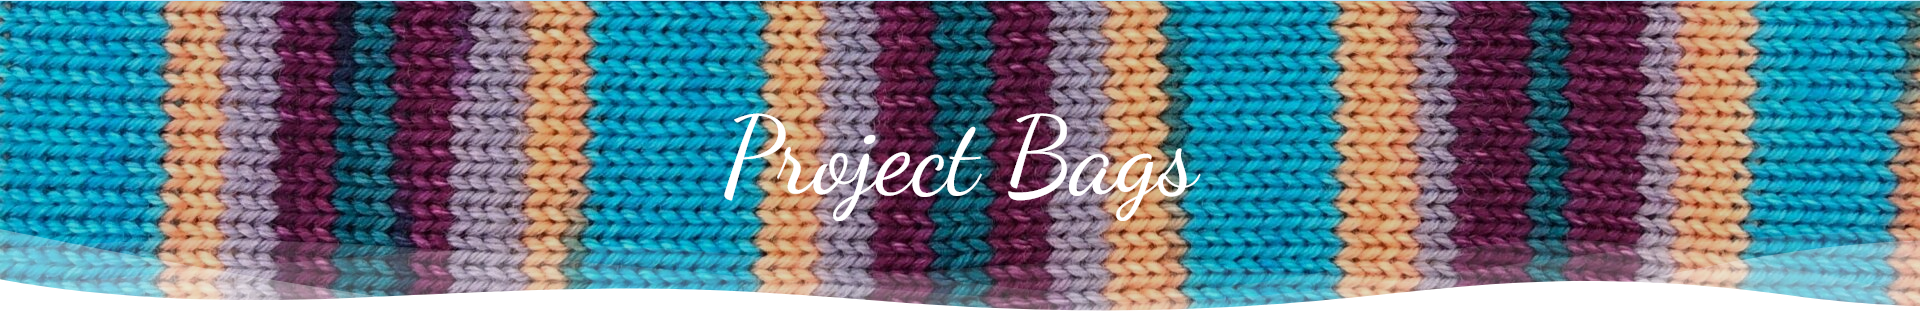 Knitting project bags banner